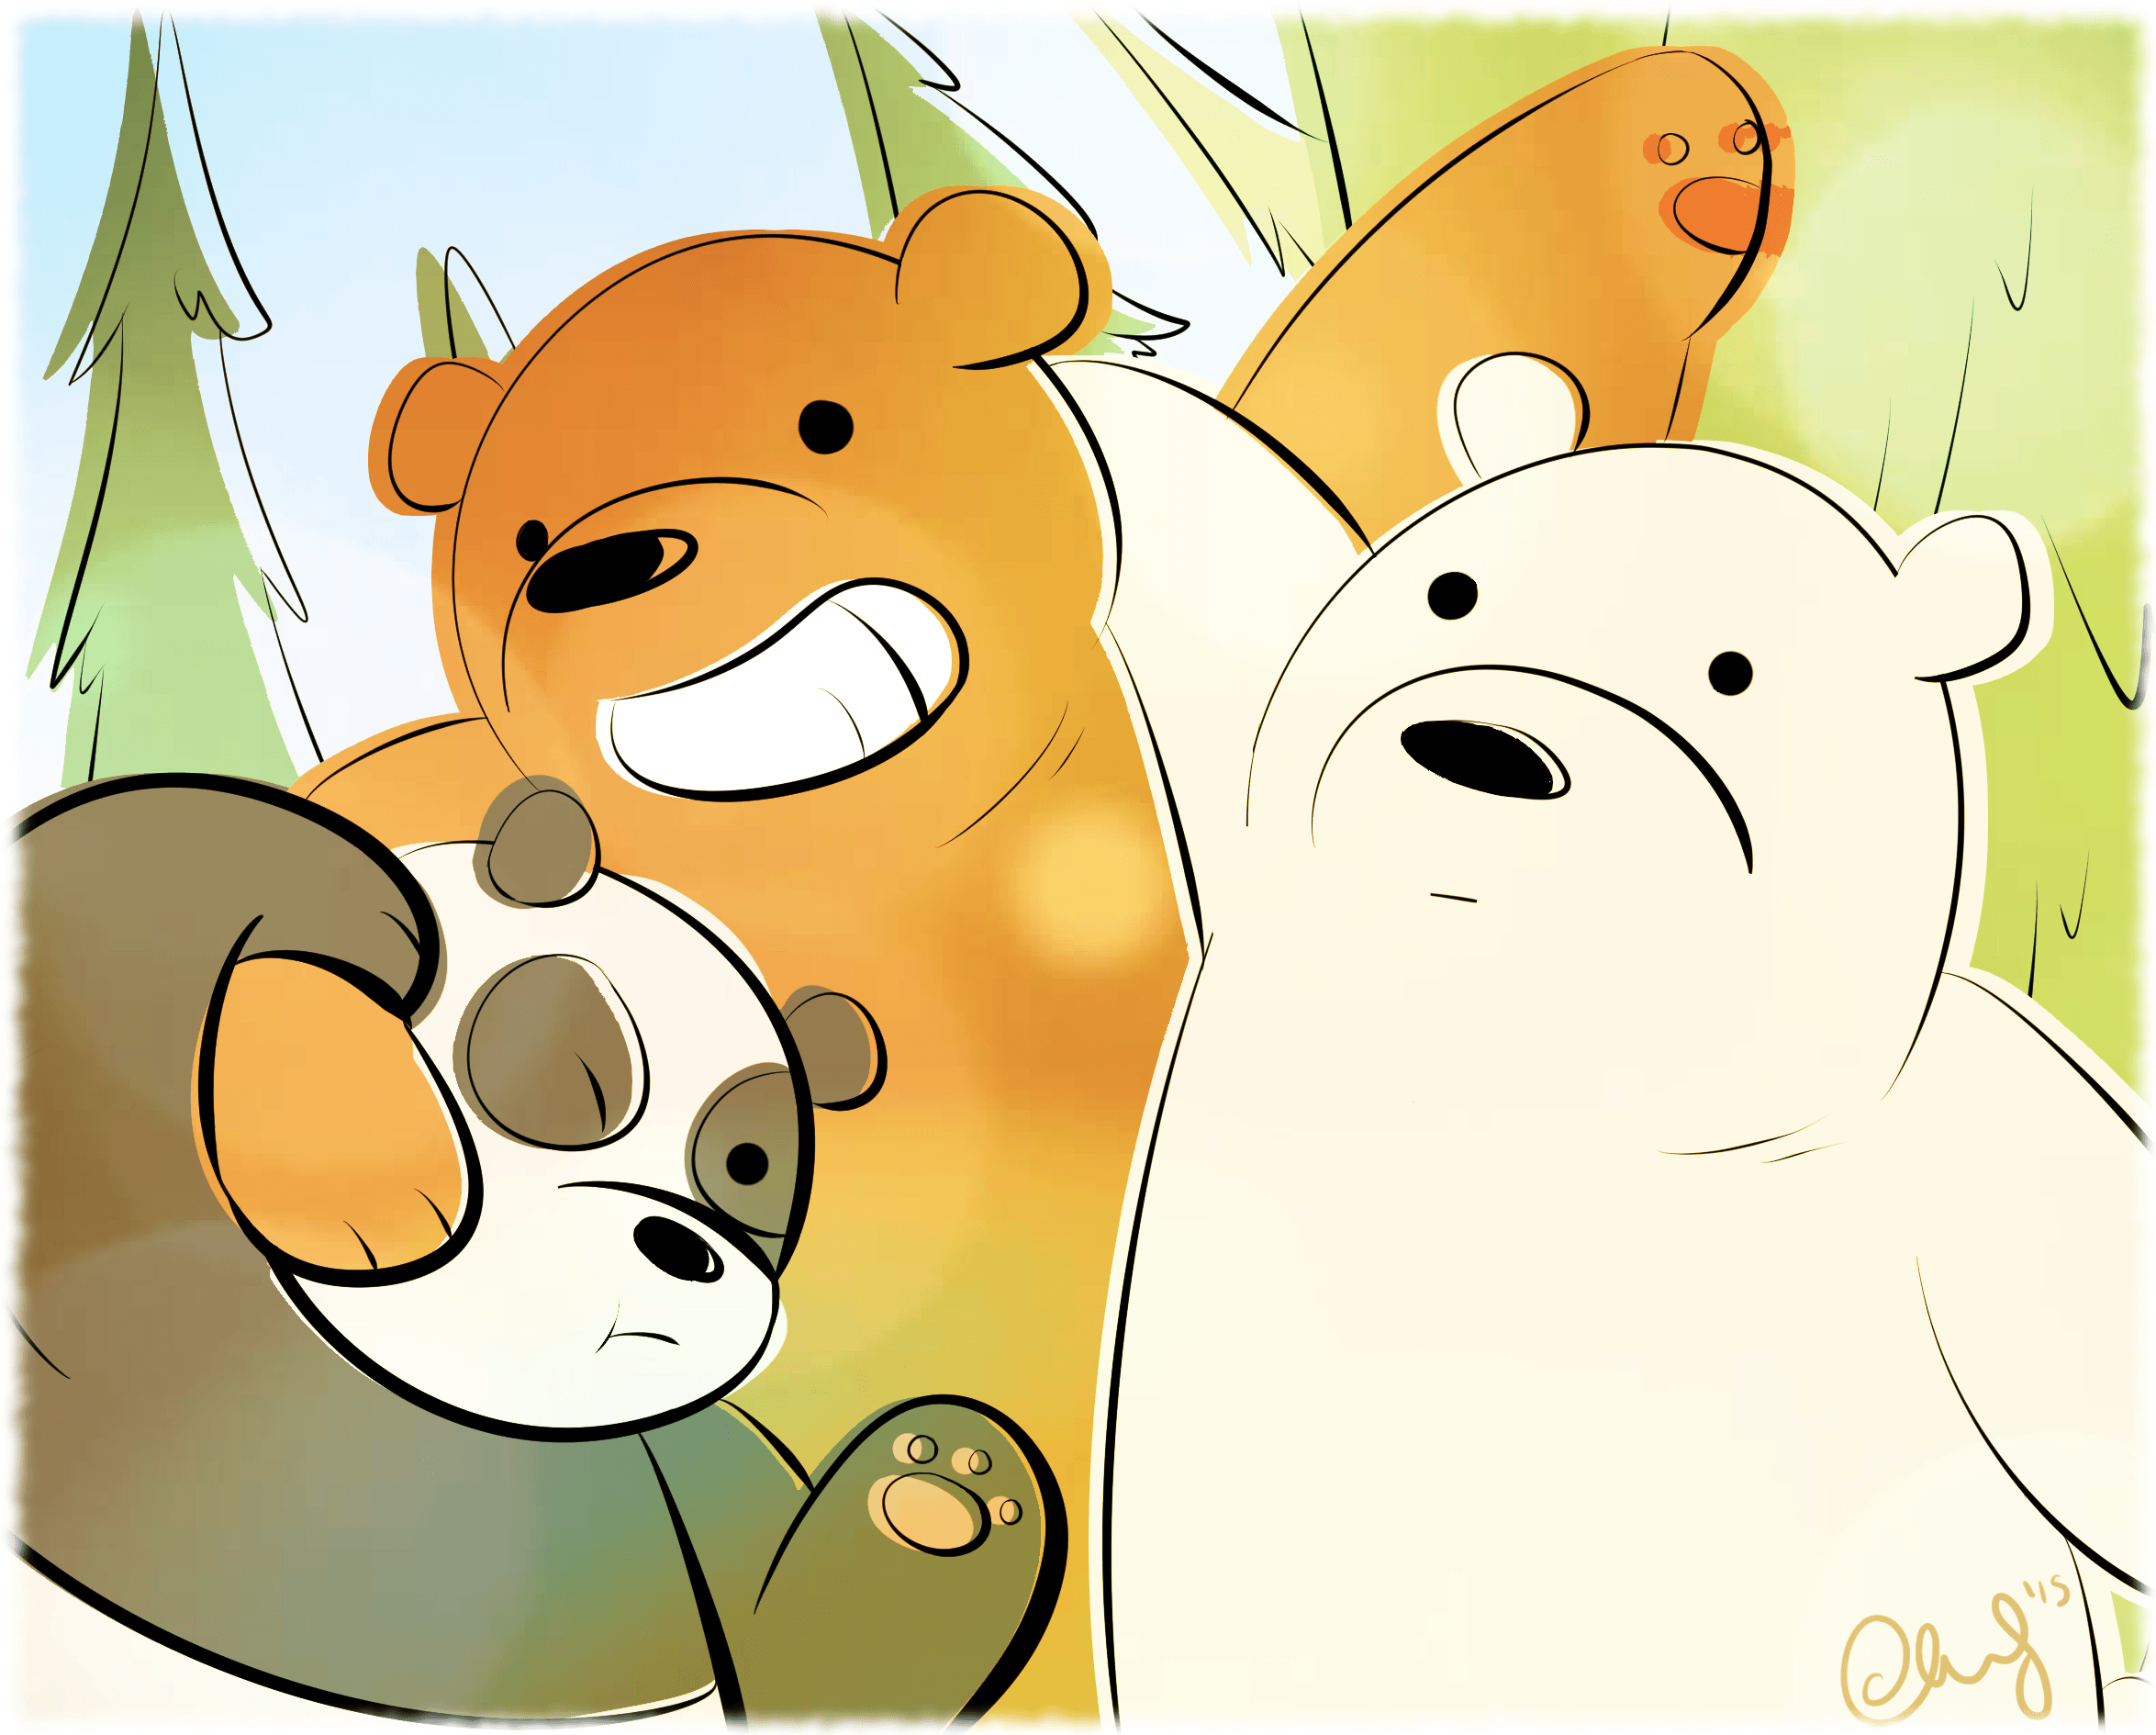 9 new movies you can watch now: We Bare Bears: The Movie 